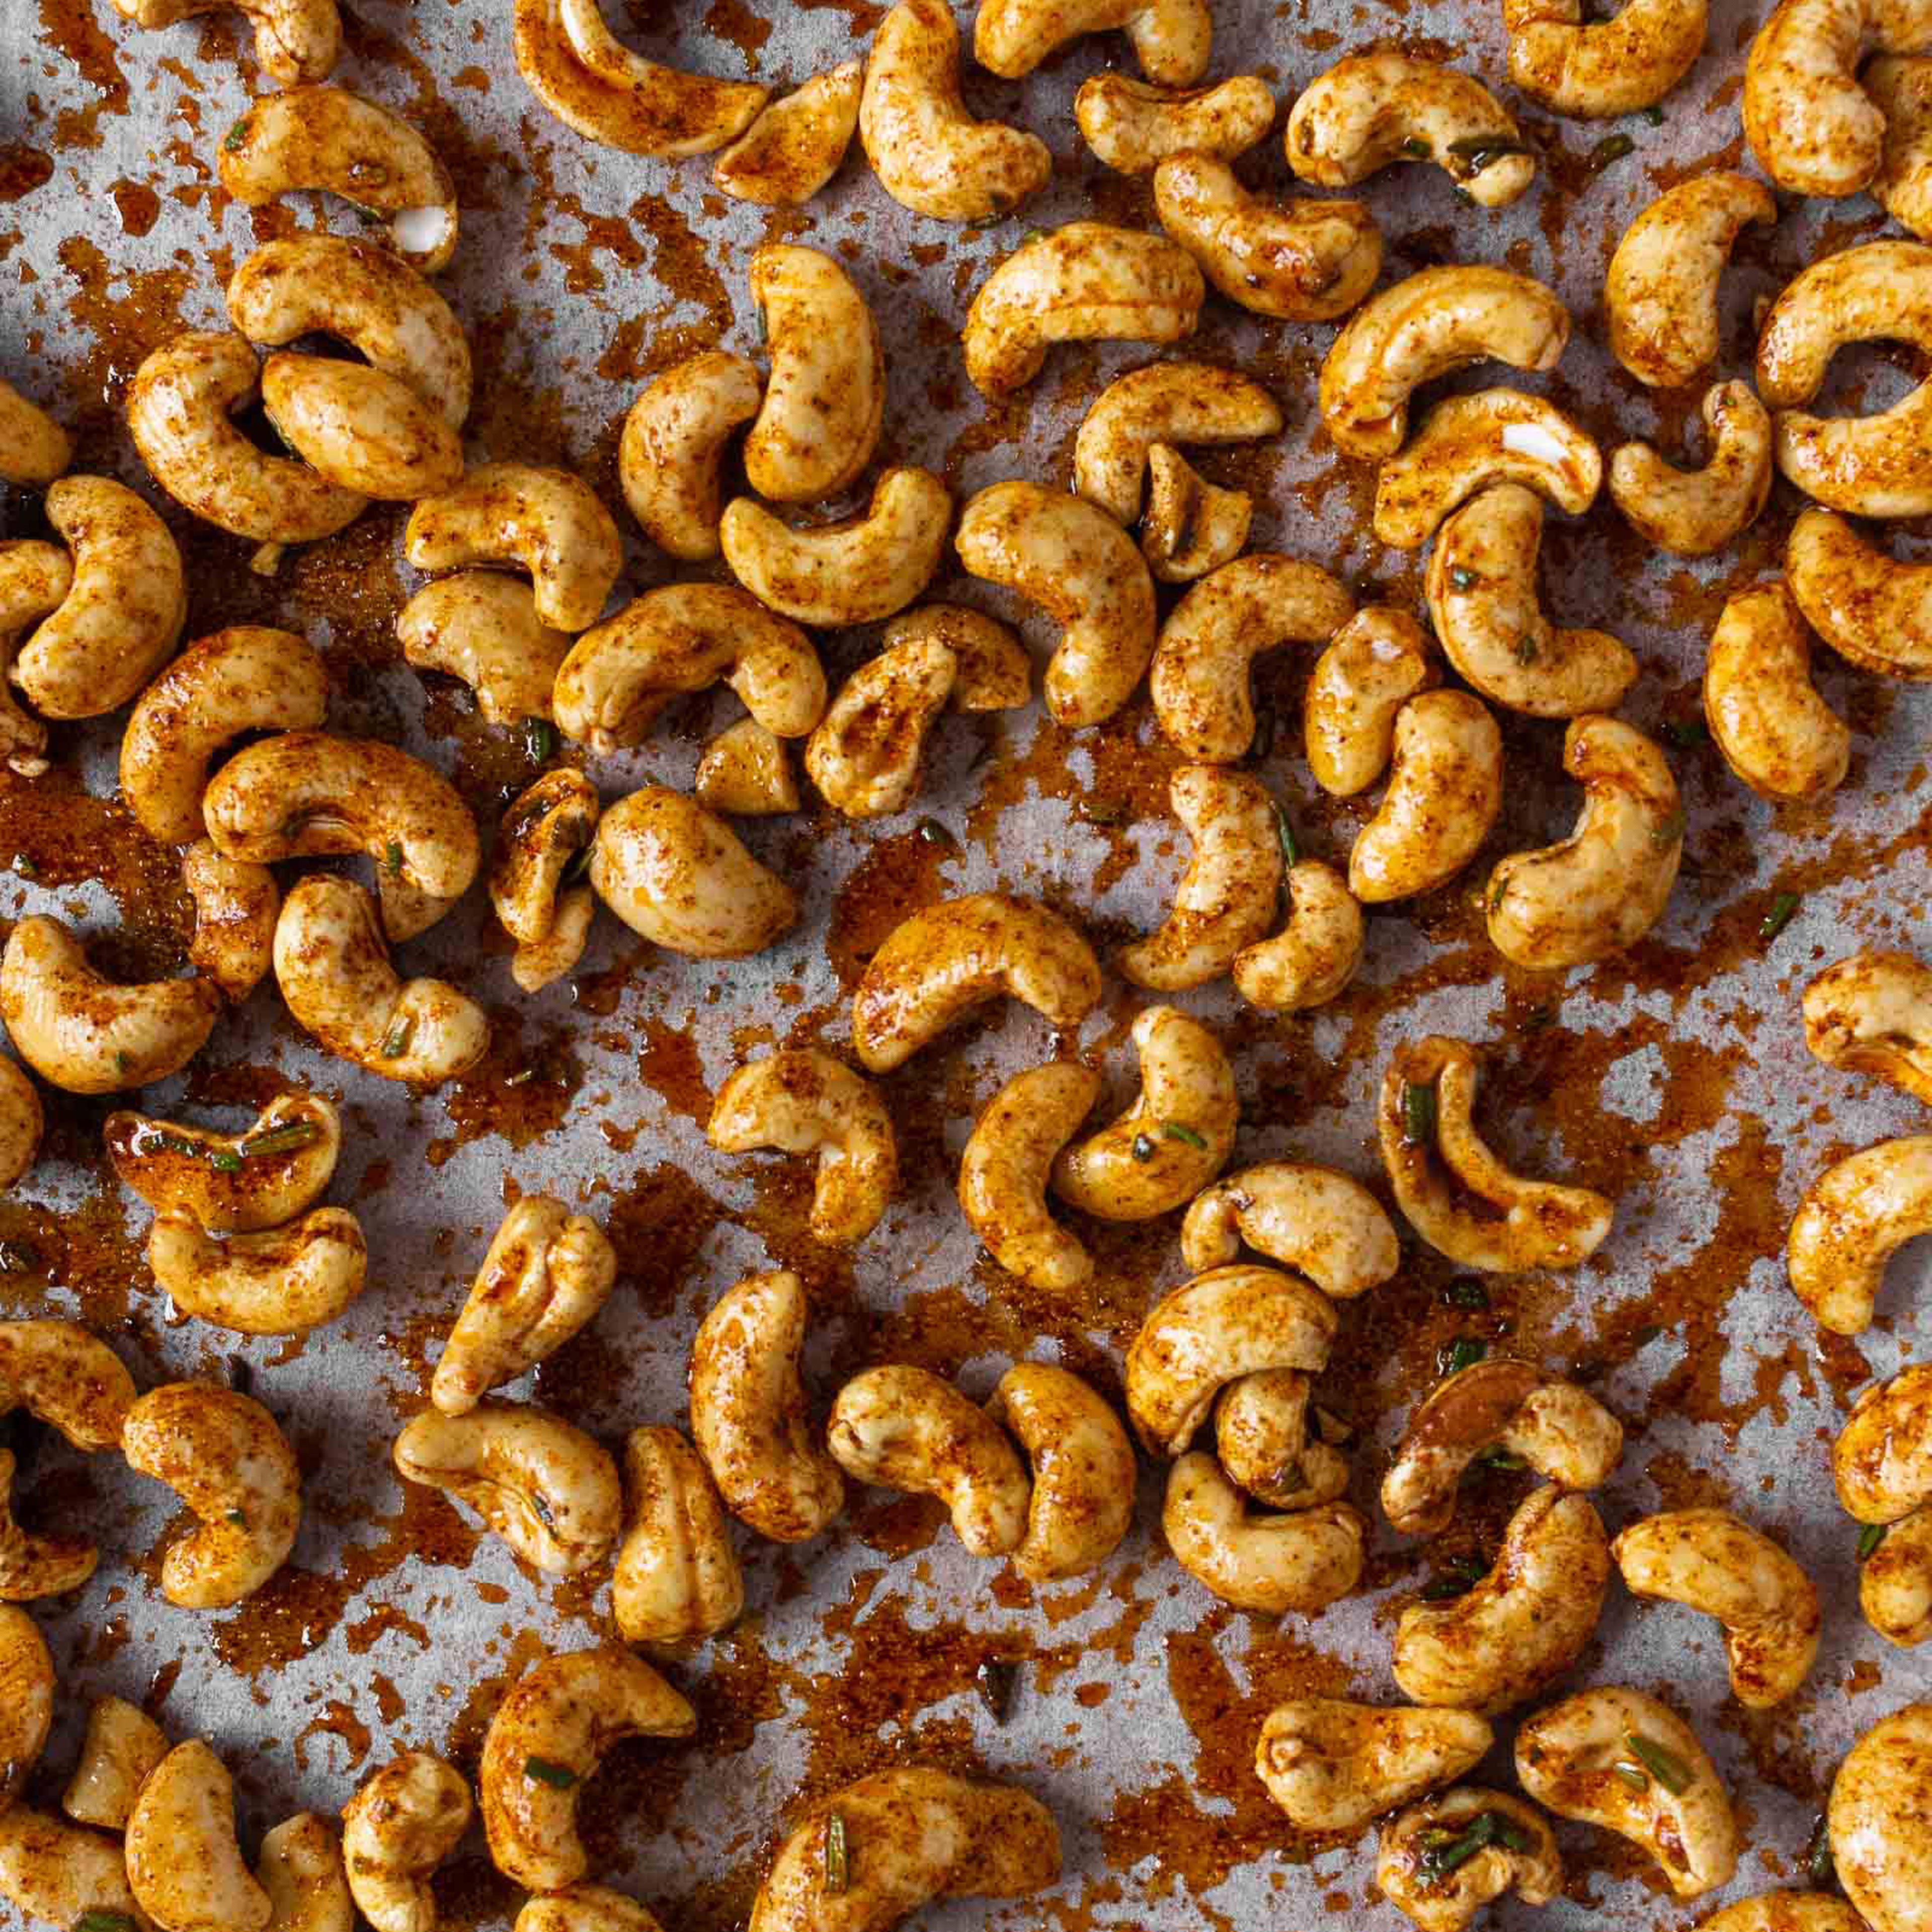 Distribute the marinated cashew nuts evenly on the baking tray, making sure they don't overlap. Roast for about 8 to 10 minutes until slightly browned.